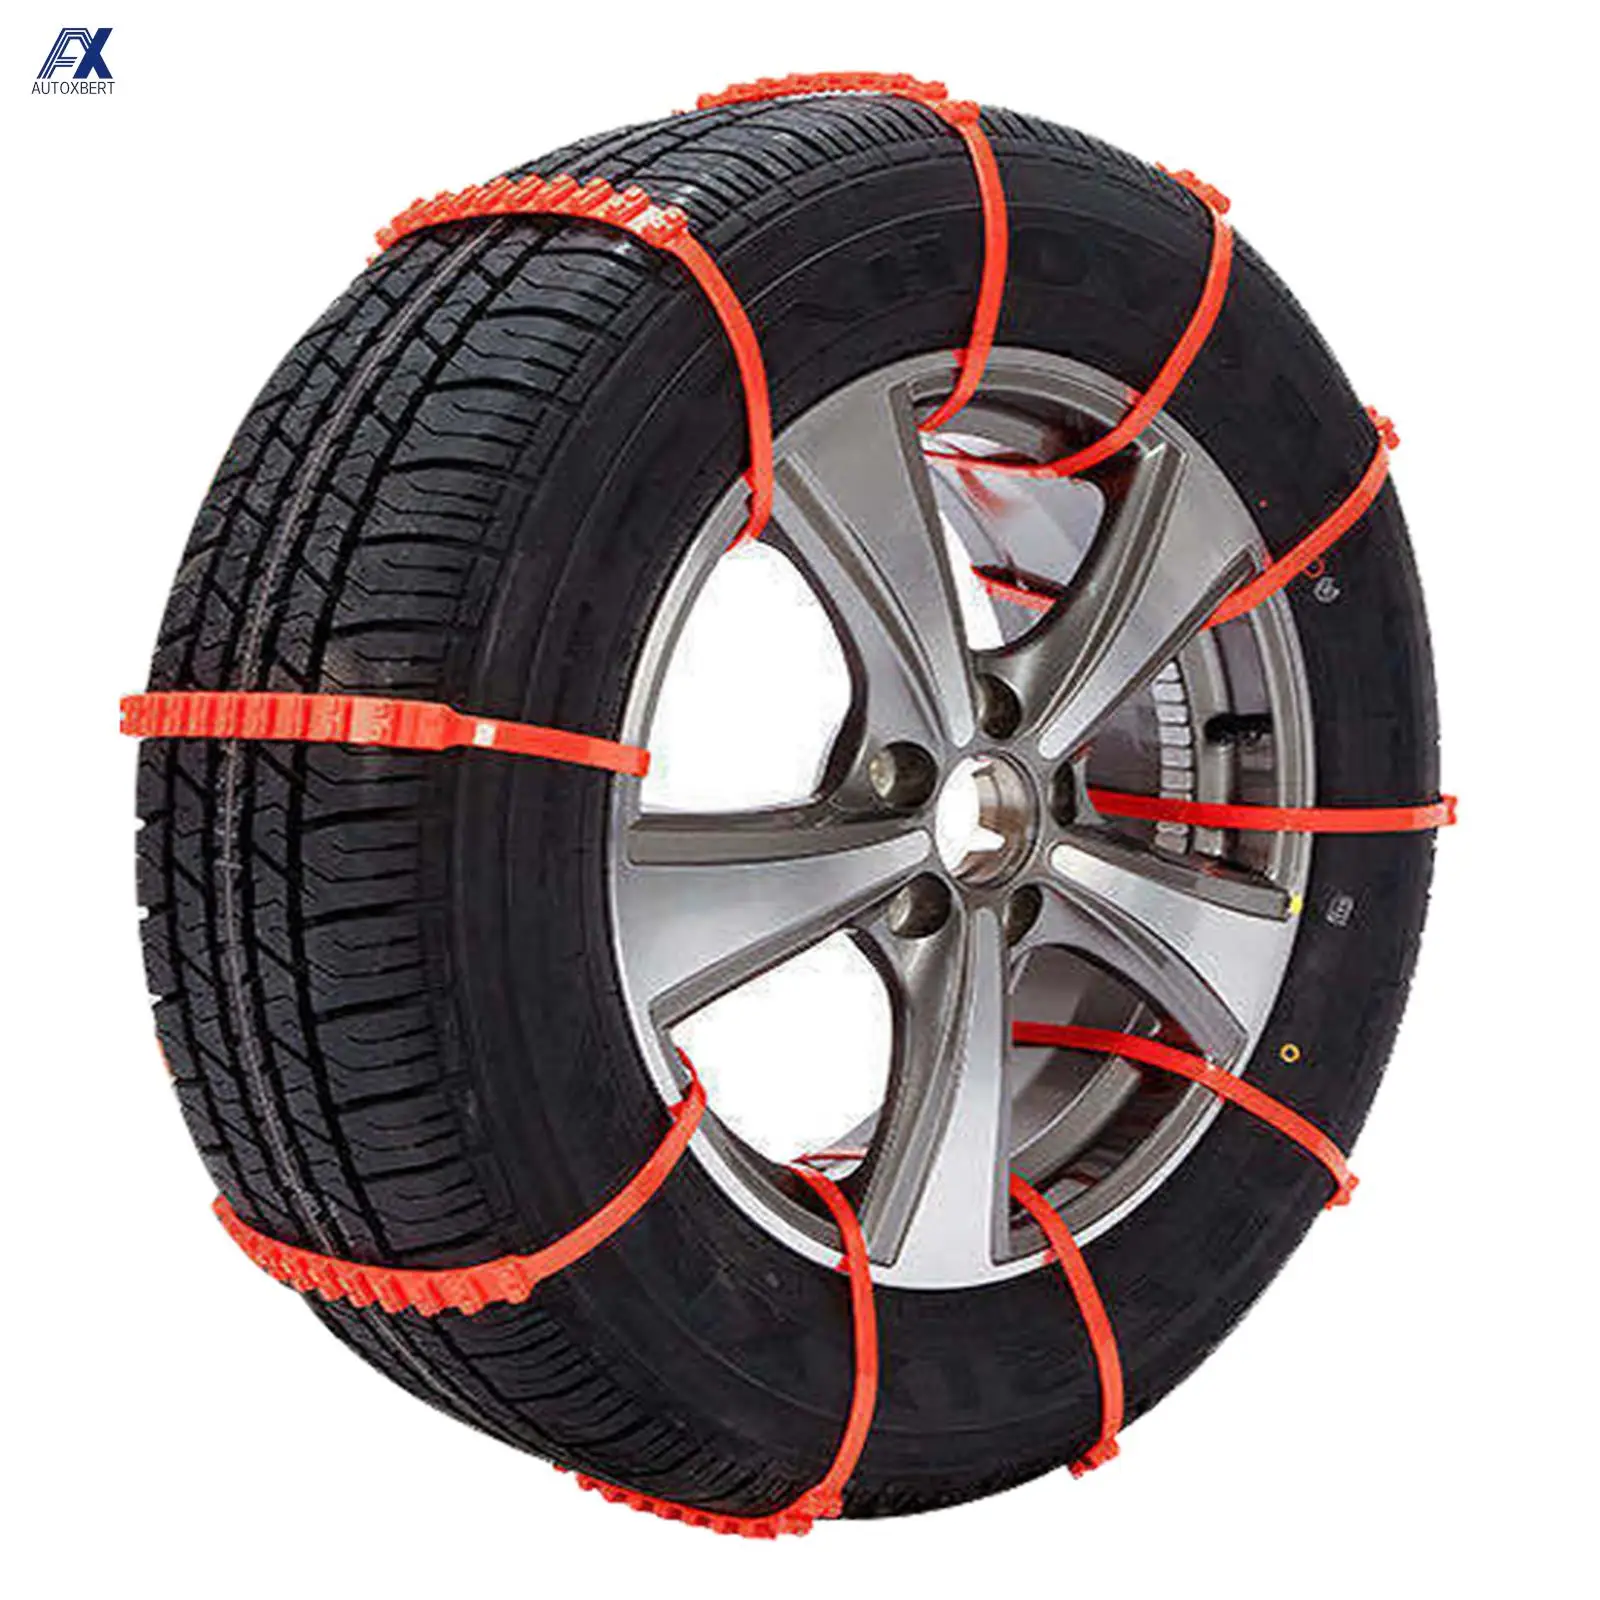 

10 Pcs Anti-Skid Car Tire Traction Blocks Wheel Chain Emergency Snow Mud Sand Tyre Chain Straps Snow Mud Ice Recovery Emergency